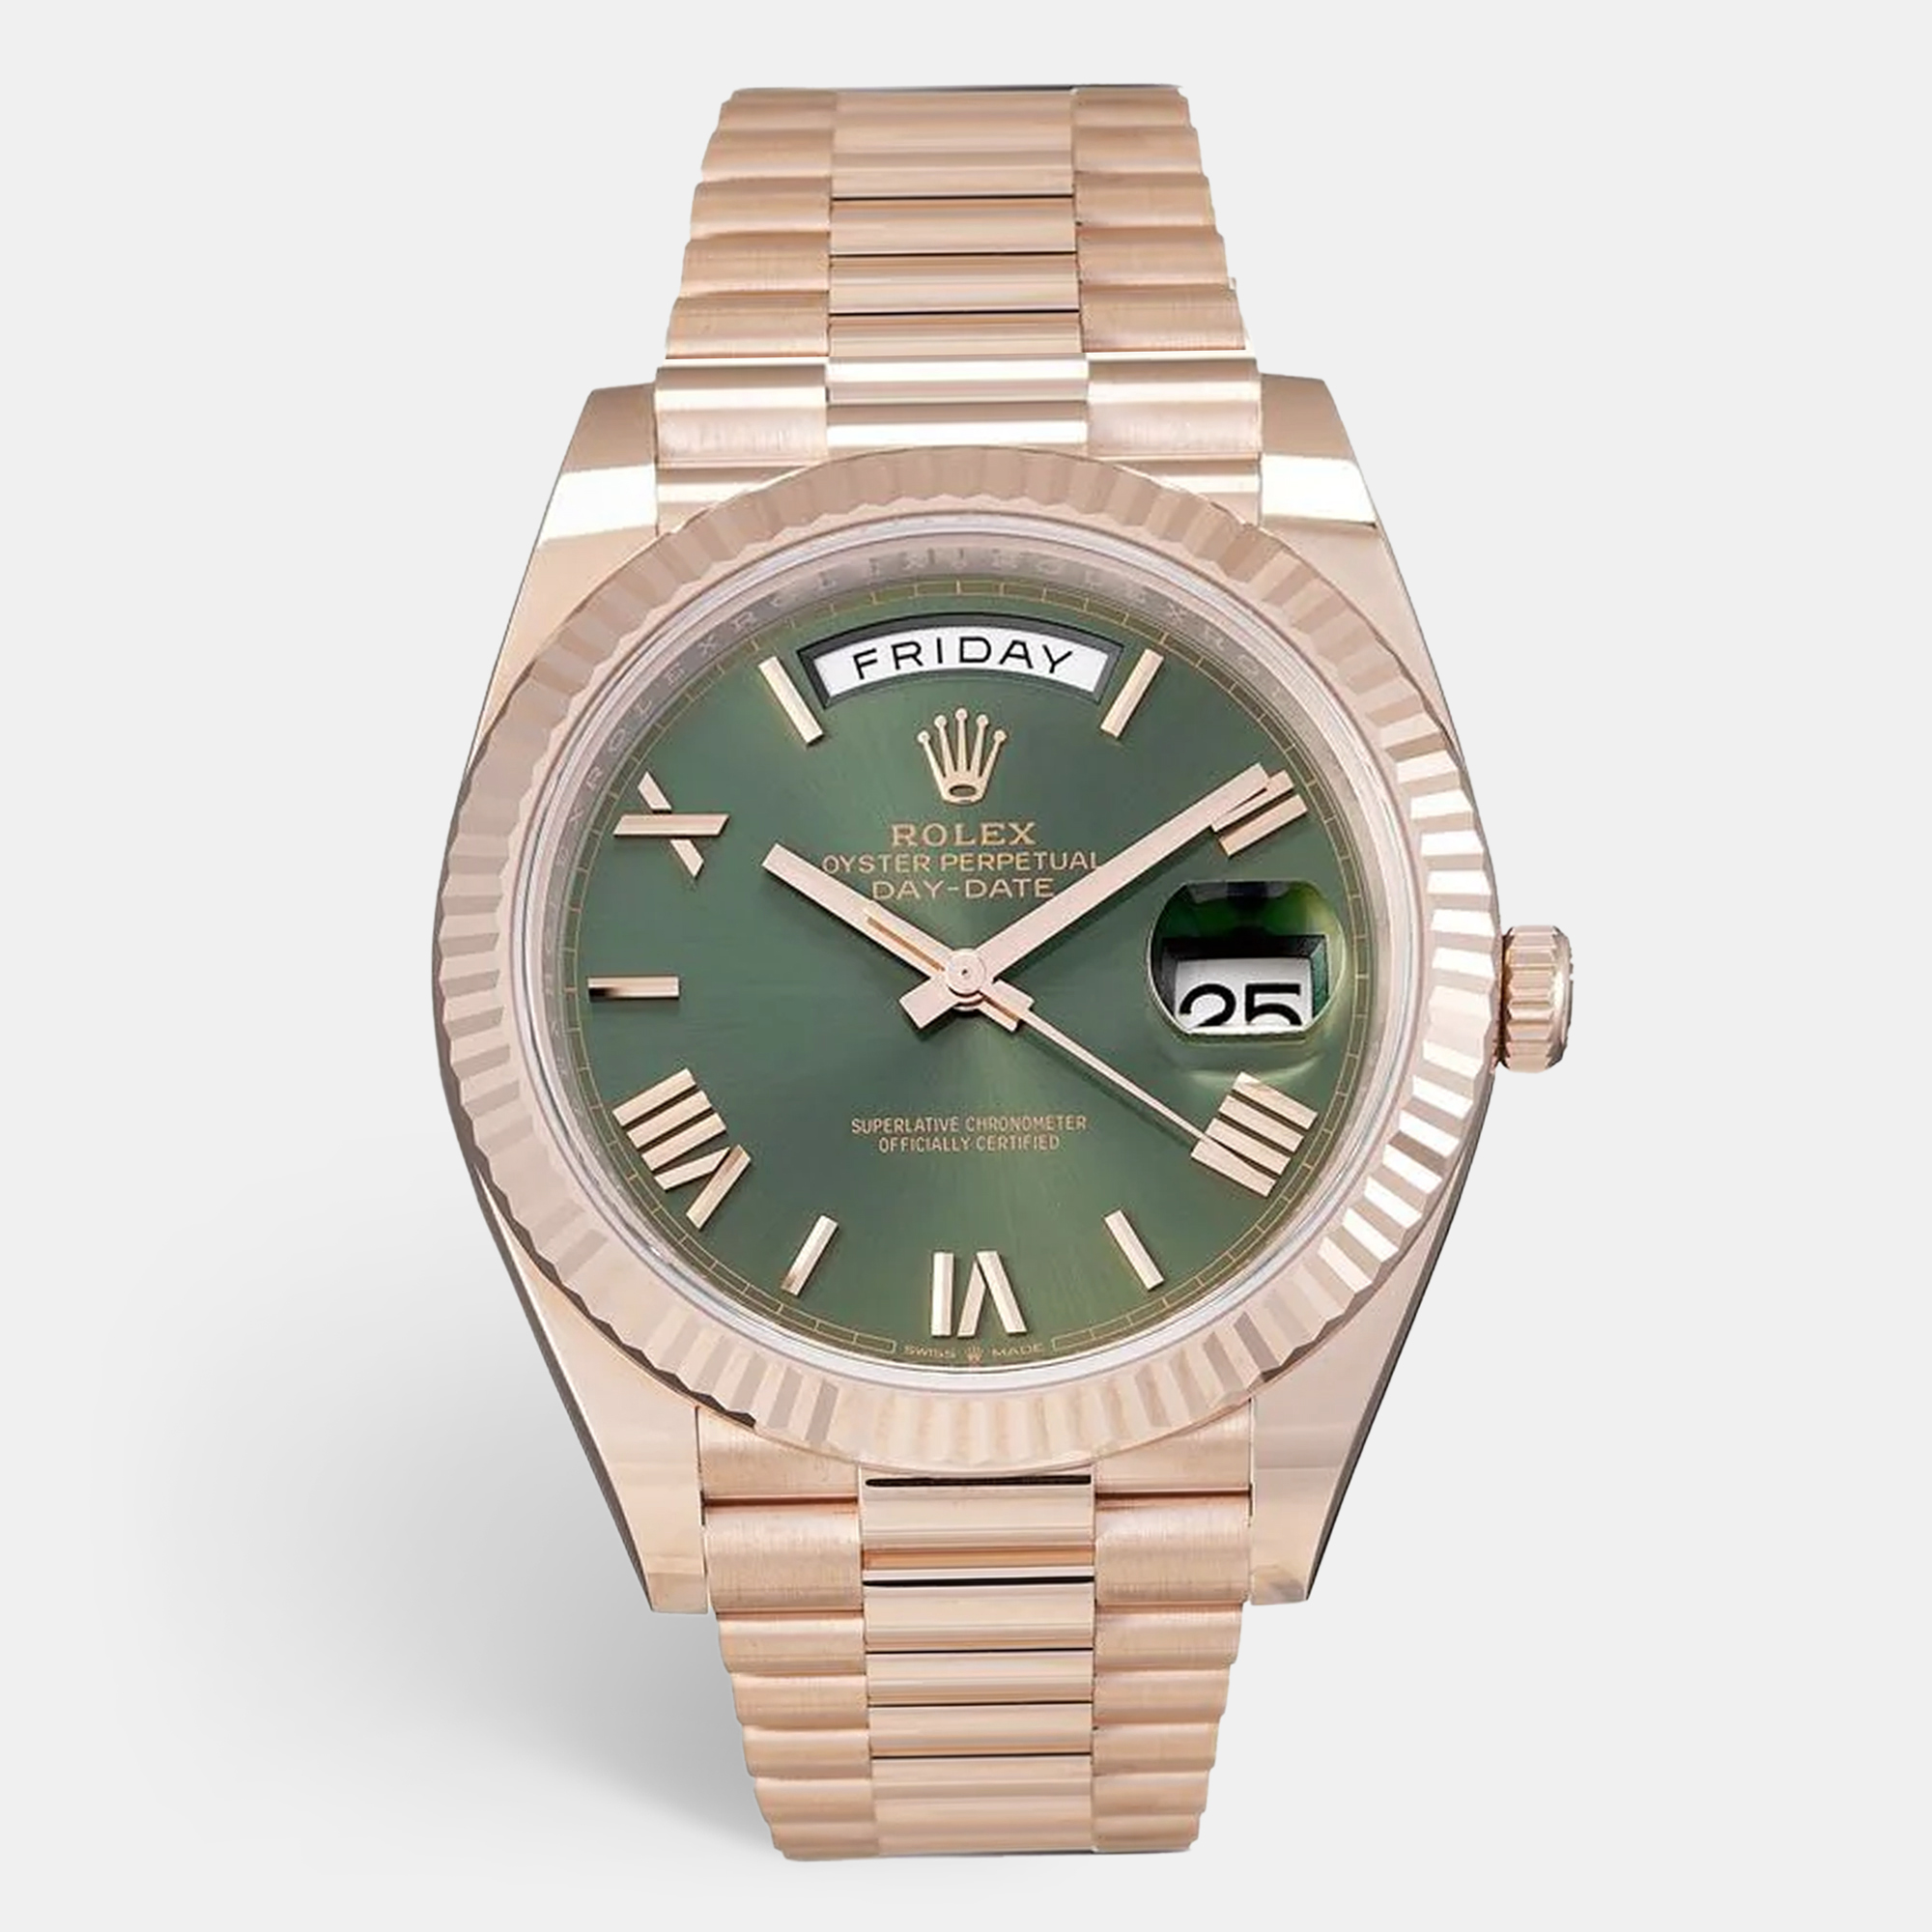 Elevate your days look with a touch of luxury brought by this Rolex Day Date wristwatch. Crafted using durable materials the designer watch is set with a sturdy case an easy to read dial and a comfortable bracelet.